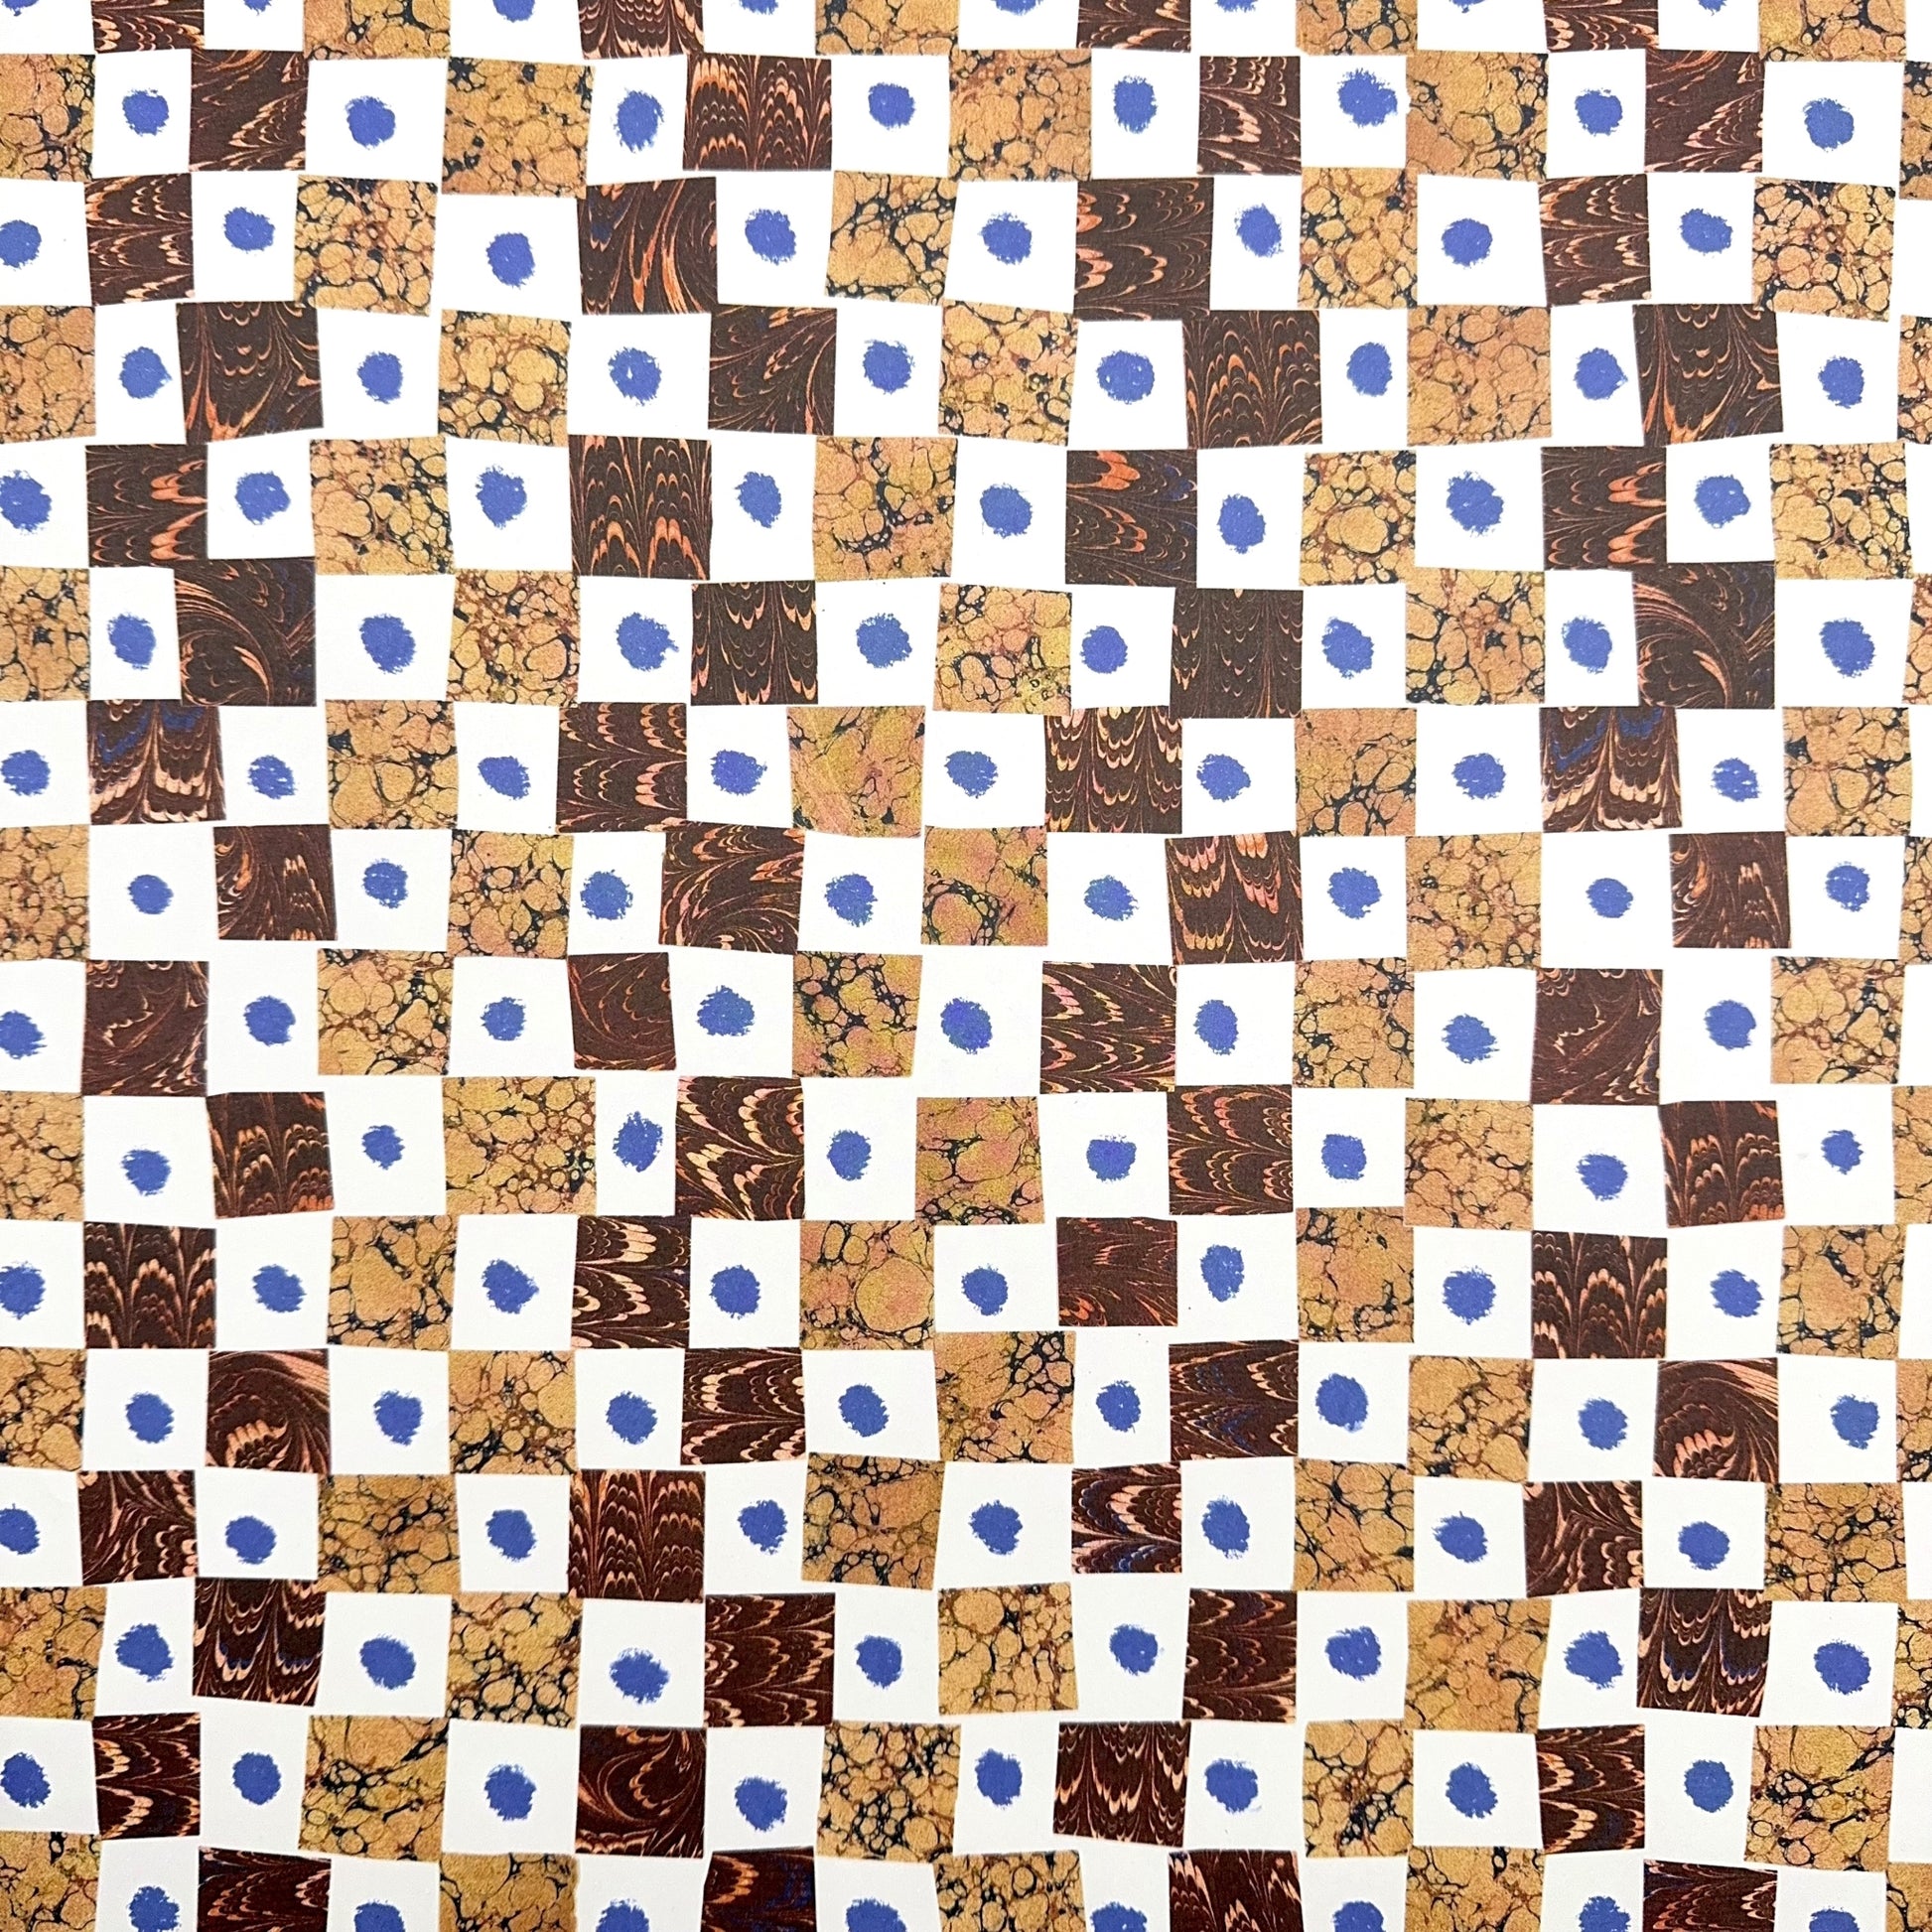 A sheet of wrapping paper by Hadley Paper Goods with a chequerboard pattern of brown marbled squares on a white background with a blue dot.